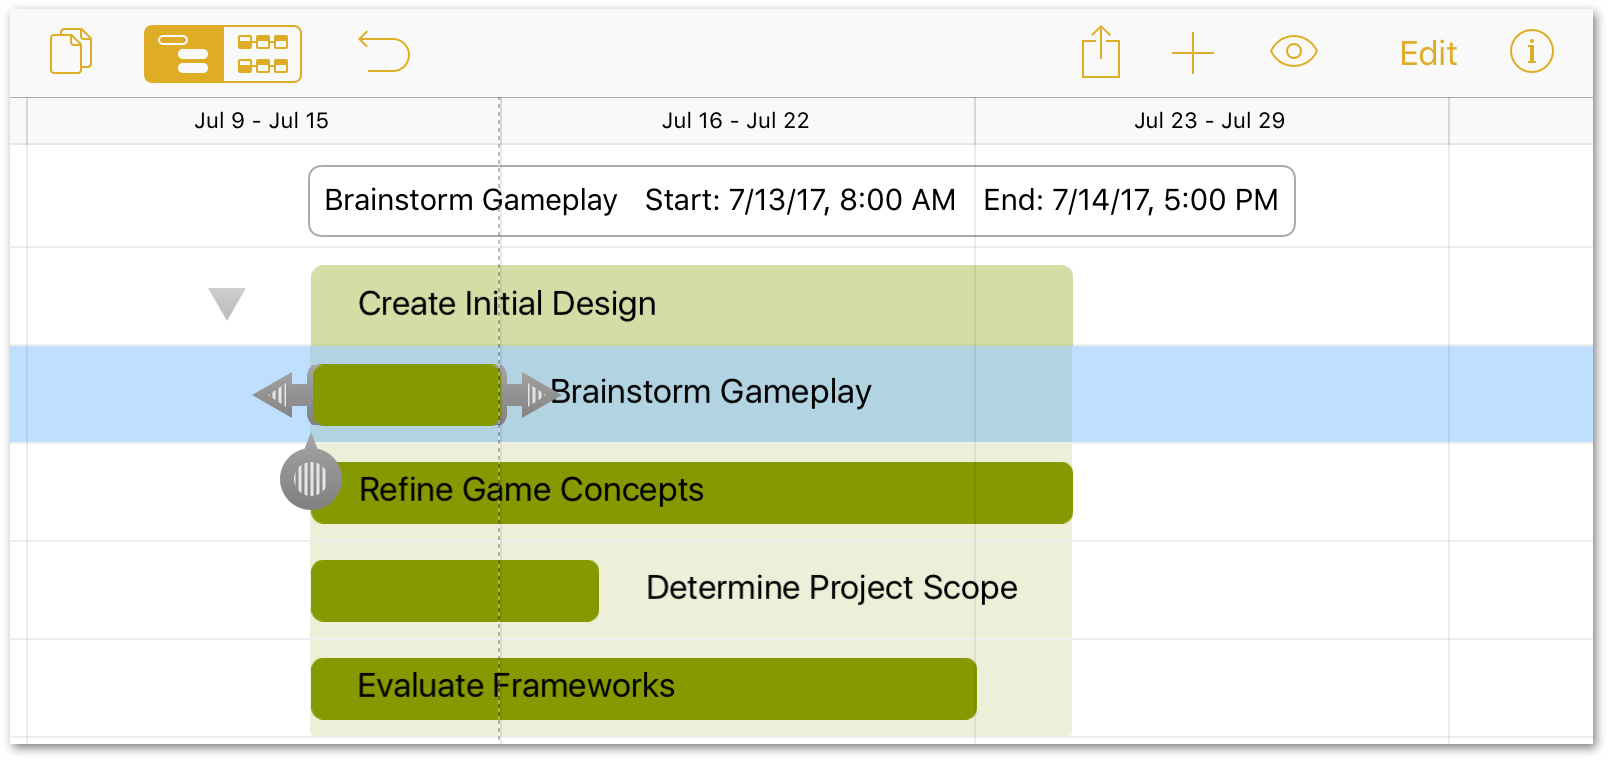 The Brainstorm Gameplay task is selected in the project editor.